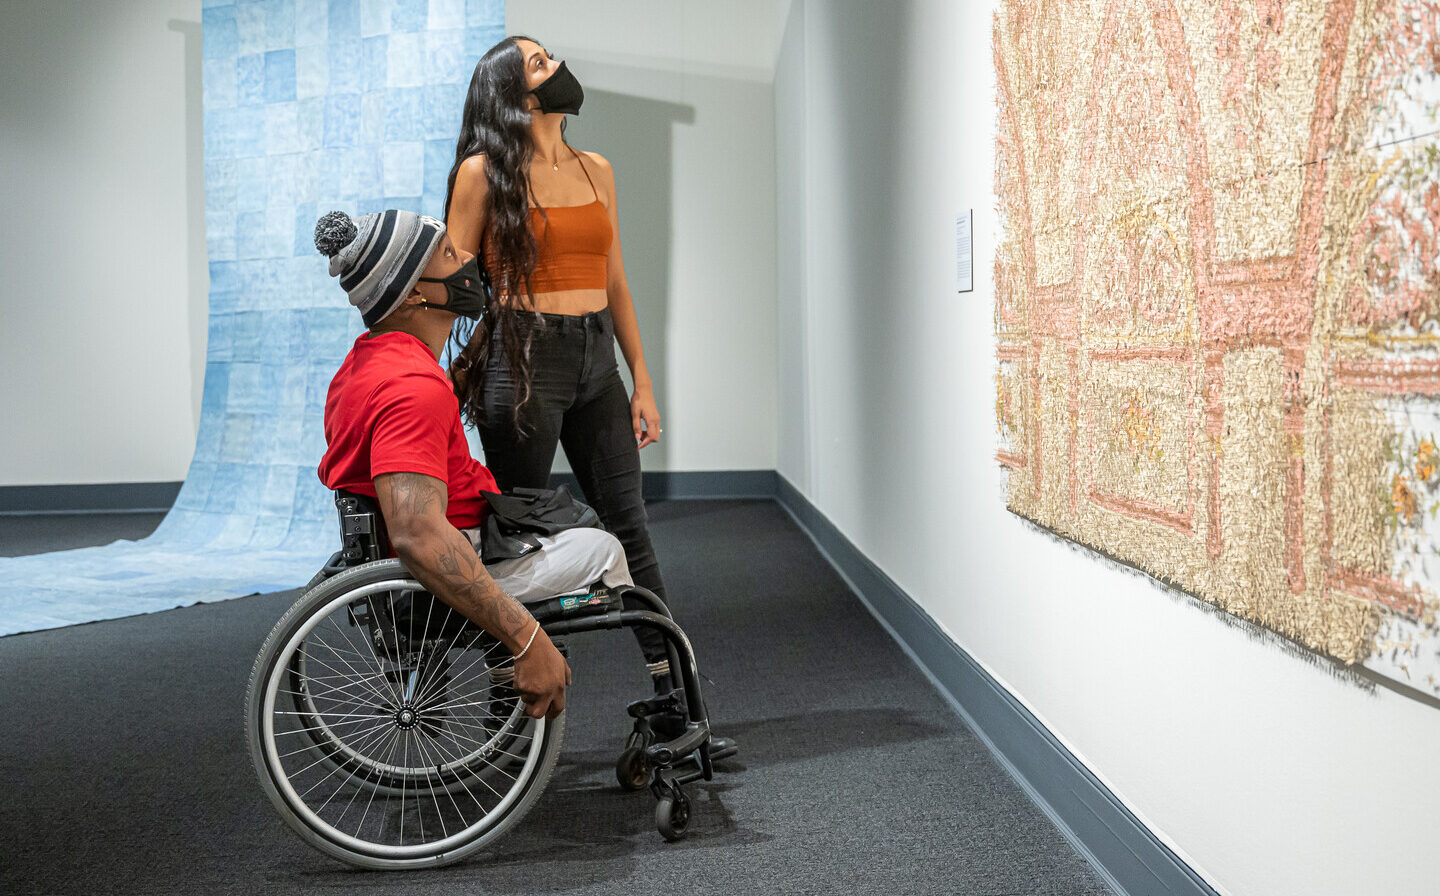 Two people look up at a large peach, tan, and ivory art installation in a gallery. The person with medium skin tone and tattoos on their right arm sits in a wheelchair and wears a red t-shirt, gray pants, gray-and-black striped winter hat, and black face mask. A person with medium skin tone, long curly black hair stands behind, wearing a burnt orange tank top, black jeans, and a black face mask. A large checkered blue artwork unfolds onto the gallery floor behind the pair.